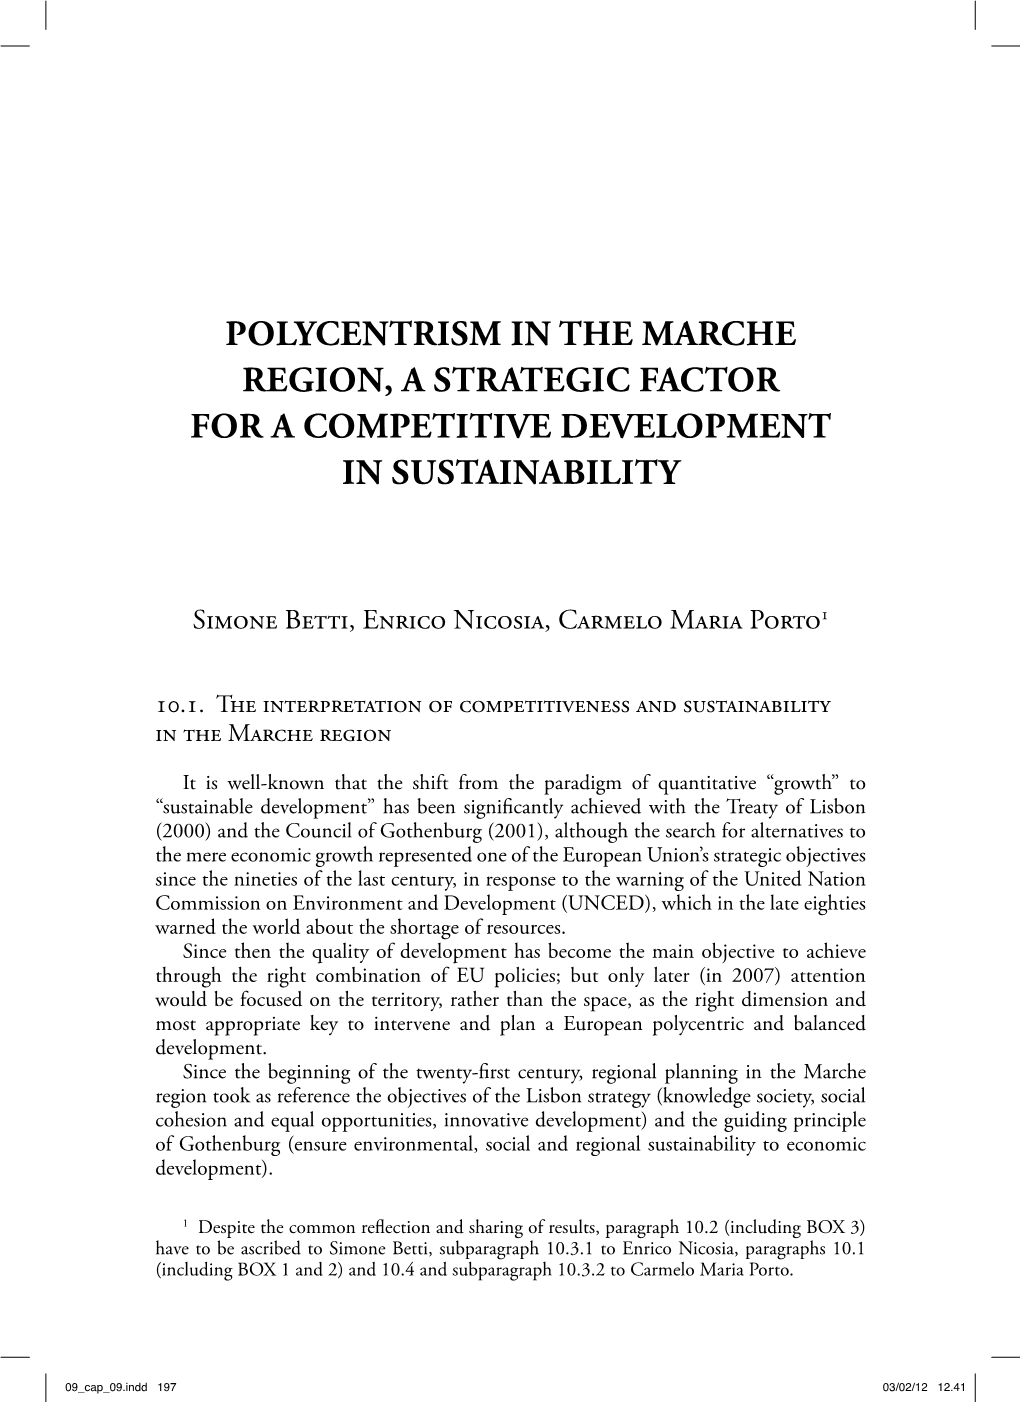 Polycentrism in the Marche Region, a Strategic Factor for a Competitive Development in Sustainability